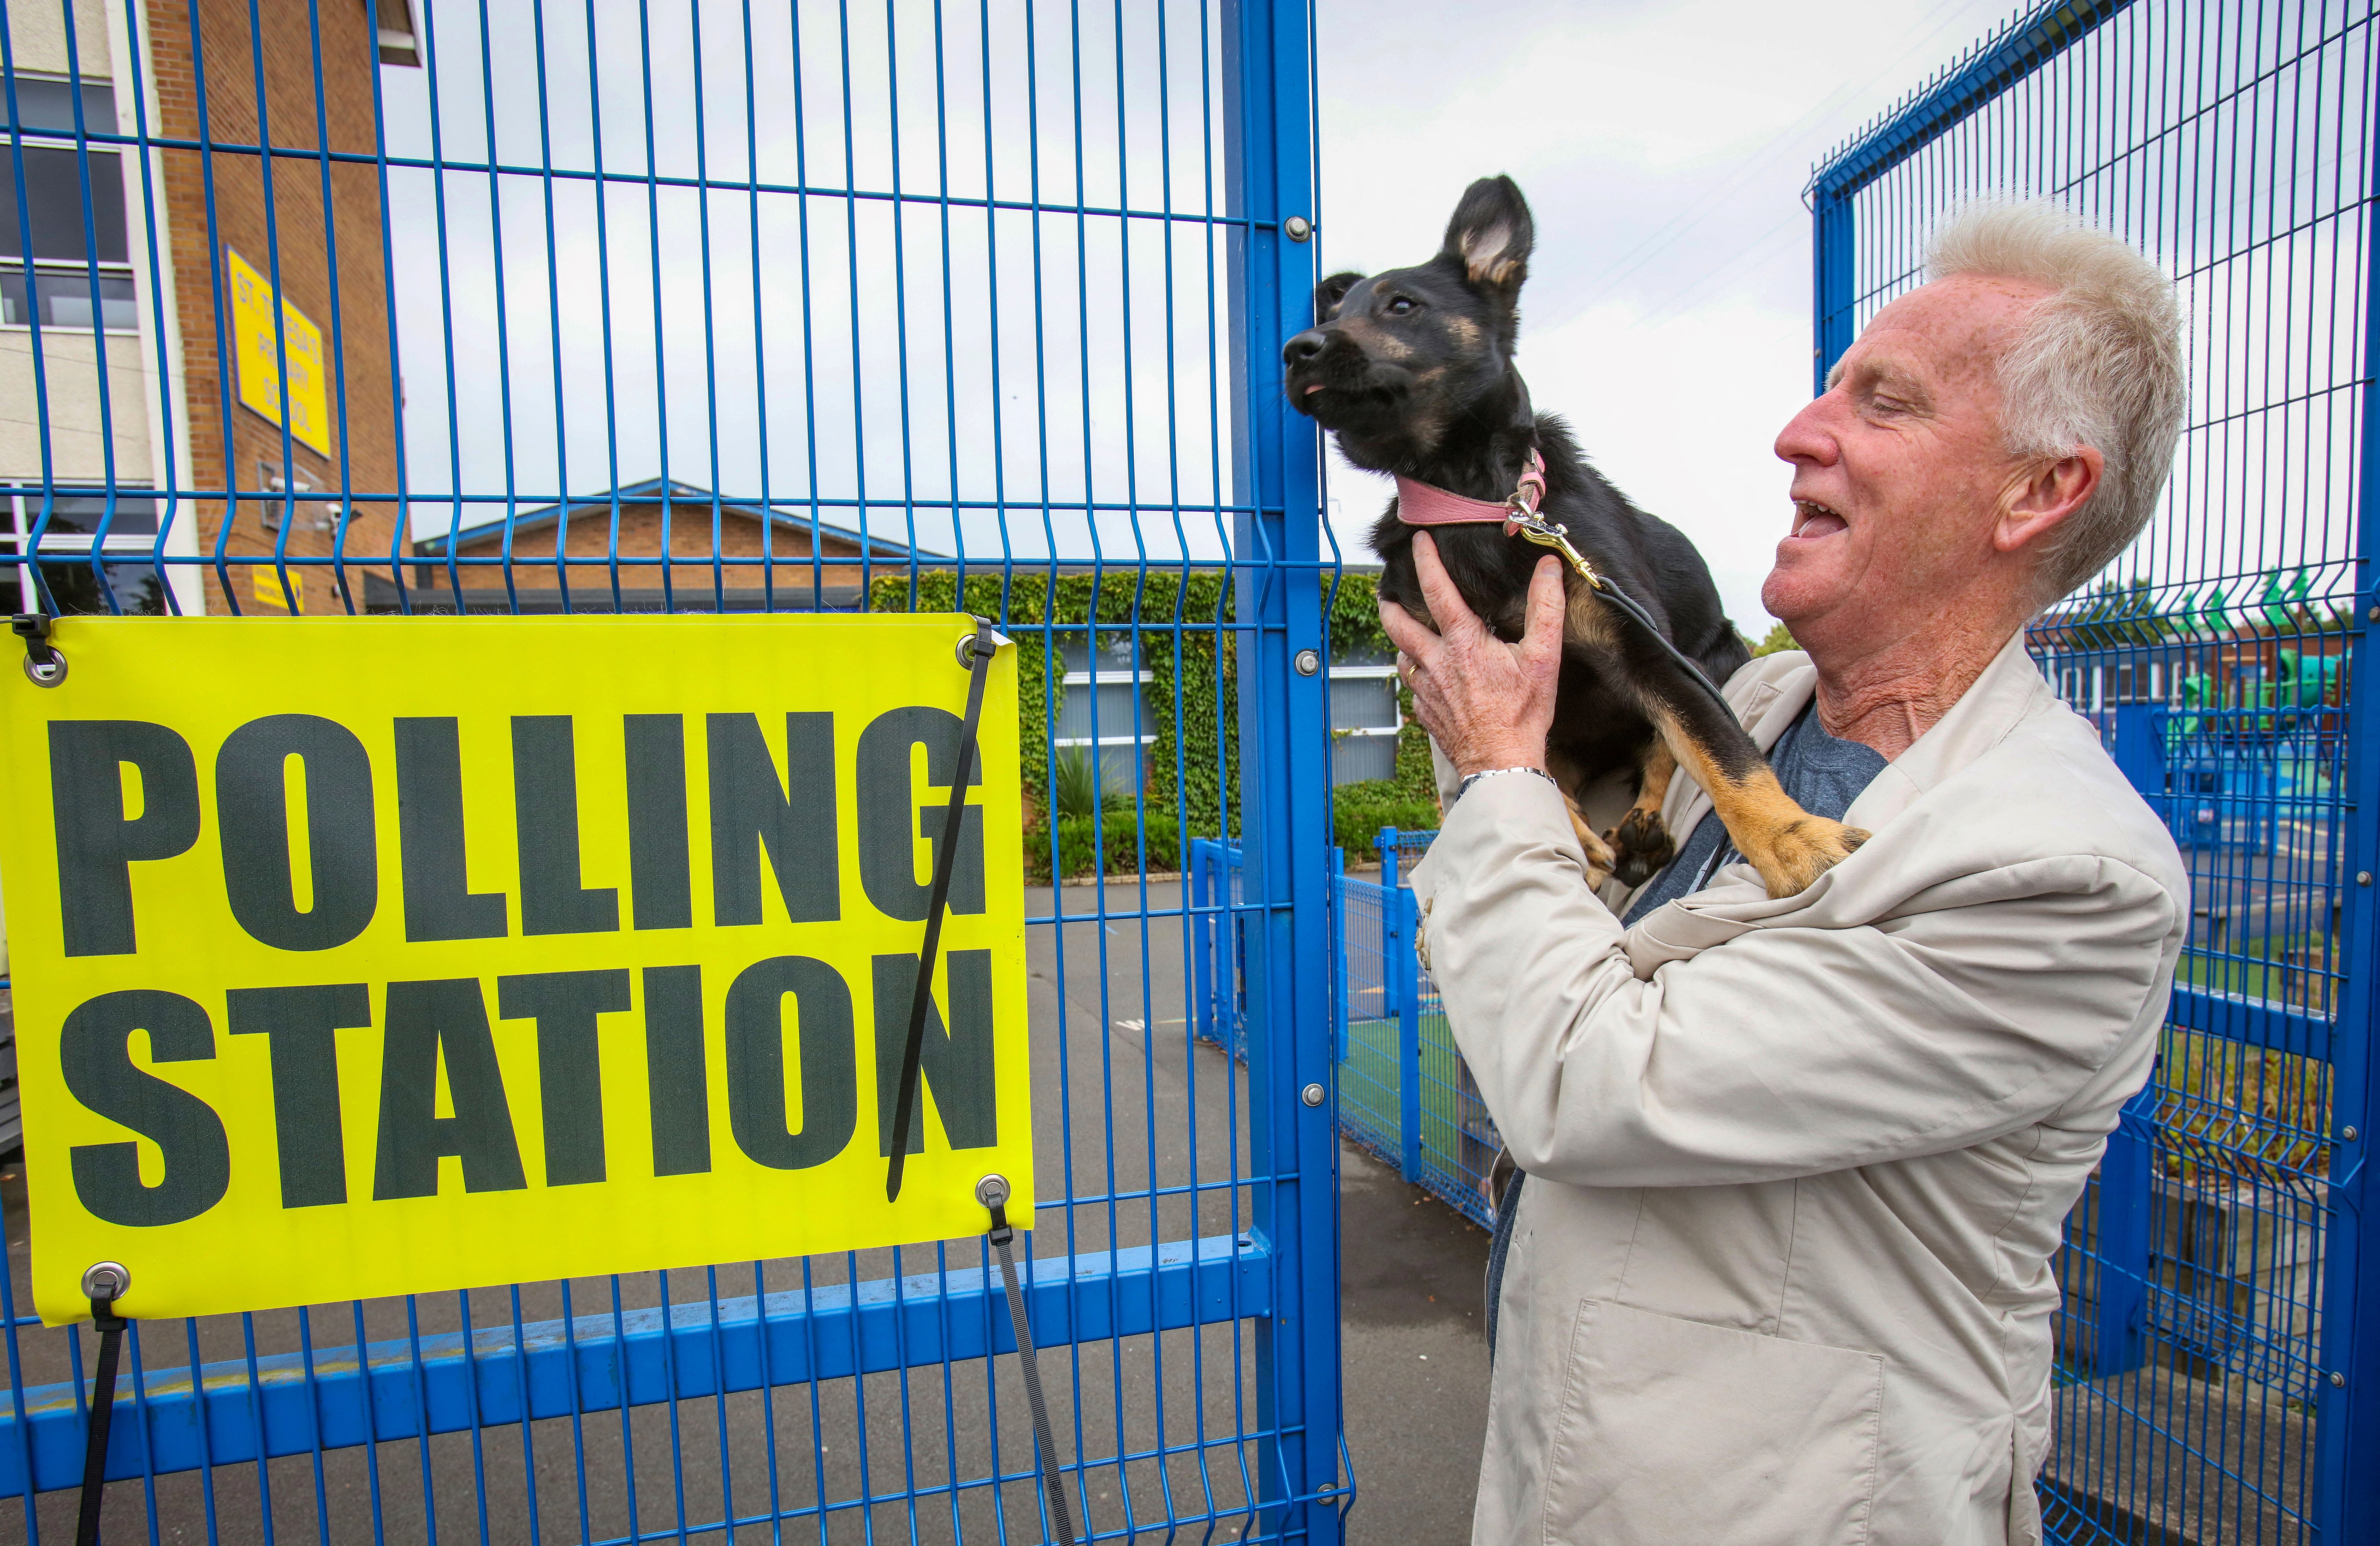 Voter Liam Magee carries his dog Freya outside a polling station in west Belfast